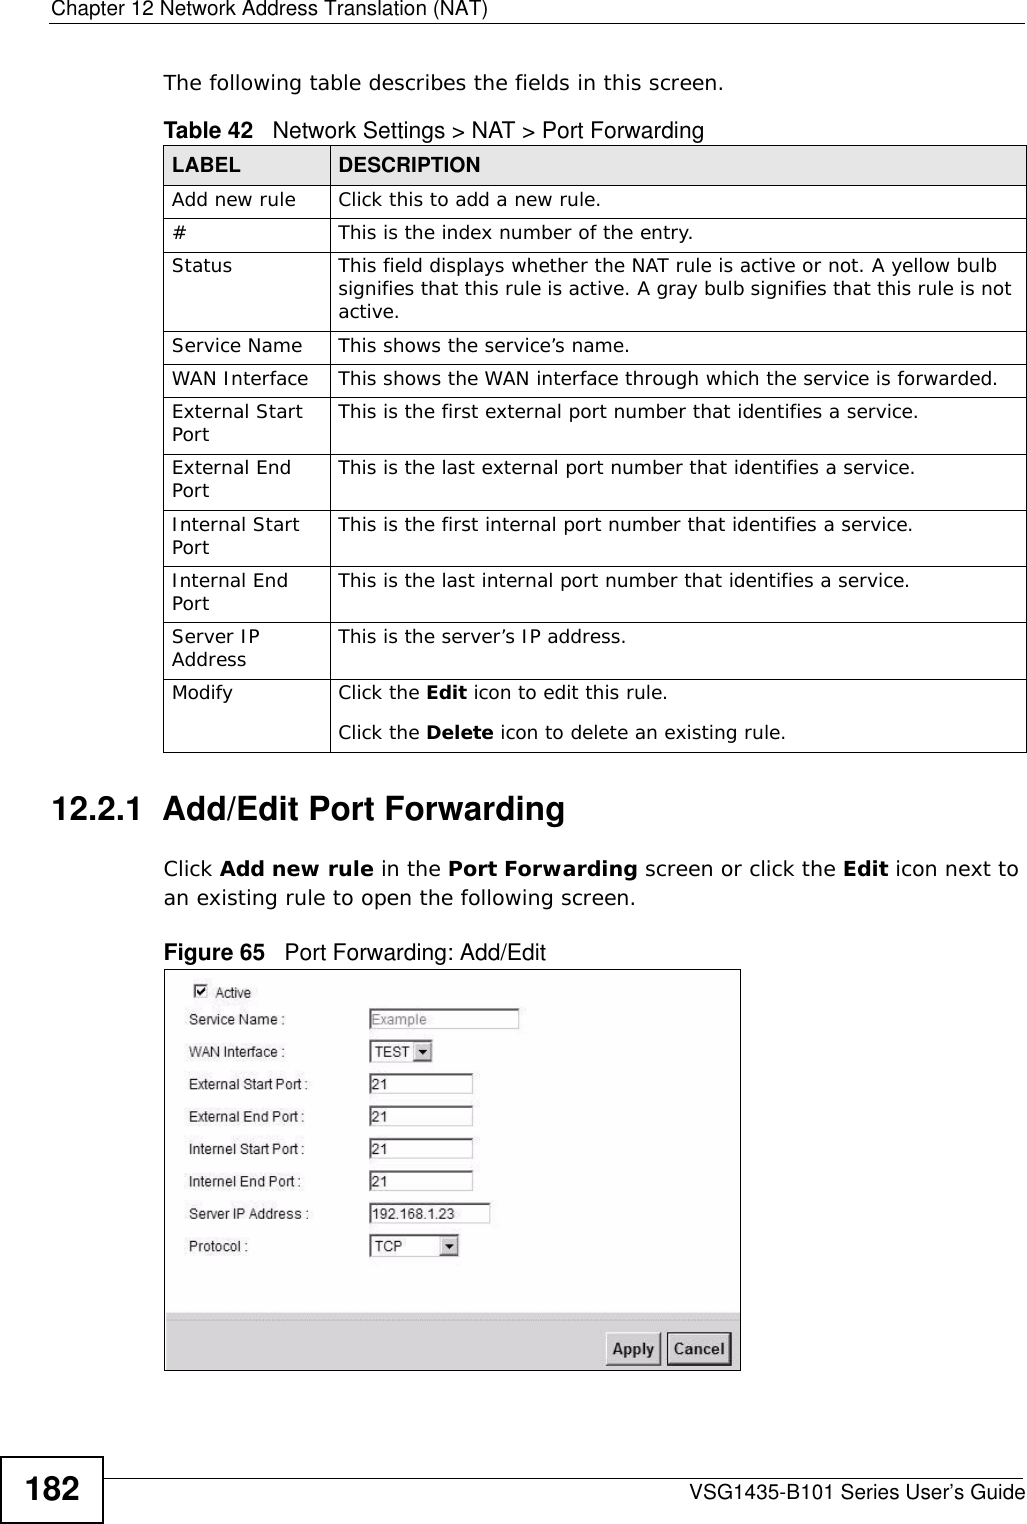 Chapter 12 Network Address Translation (NAT)VSG1435-B101 Series User’s Guide182The following table describes the fields in this screen. 12.2.1  Add/Edit Port Forwarding Click Add new rule in the Port Forwarding screen or click the Edit icon next to an existing rule to open the following screen.Figure 65   Port Forwarding: Add/Edit Table 42   Network Settings &gt; NAT &gt; Port ForwardingLABEL DESCRIPTIONAdd new rule Click this to add a new rule.#This is the index number of the entry.Status This field displays whether the NAT rule is active or not. A yellow bulb signifies that this rule is active. A gray bulb signifies that this rule is not active.Service Name This shows the service’s name.WAN Interface This shows the WAN interface through which the service is forwarded.External Start Port  This is the first external port number that identifies a service.External End Port  This is the last external port number that identifies a service.Internal Start Port  This is the first internal port number that identifies a service.Internal End Port  This is the last internal port number that identifies a service.Server IP Address This is the server’s IP address.Modify Click the Edit icon to edit this rule.Click the Delete icon to delete an existing rule. 